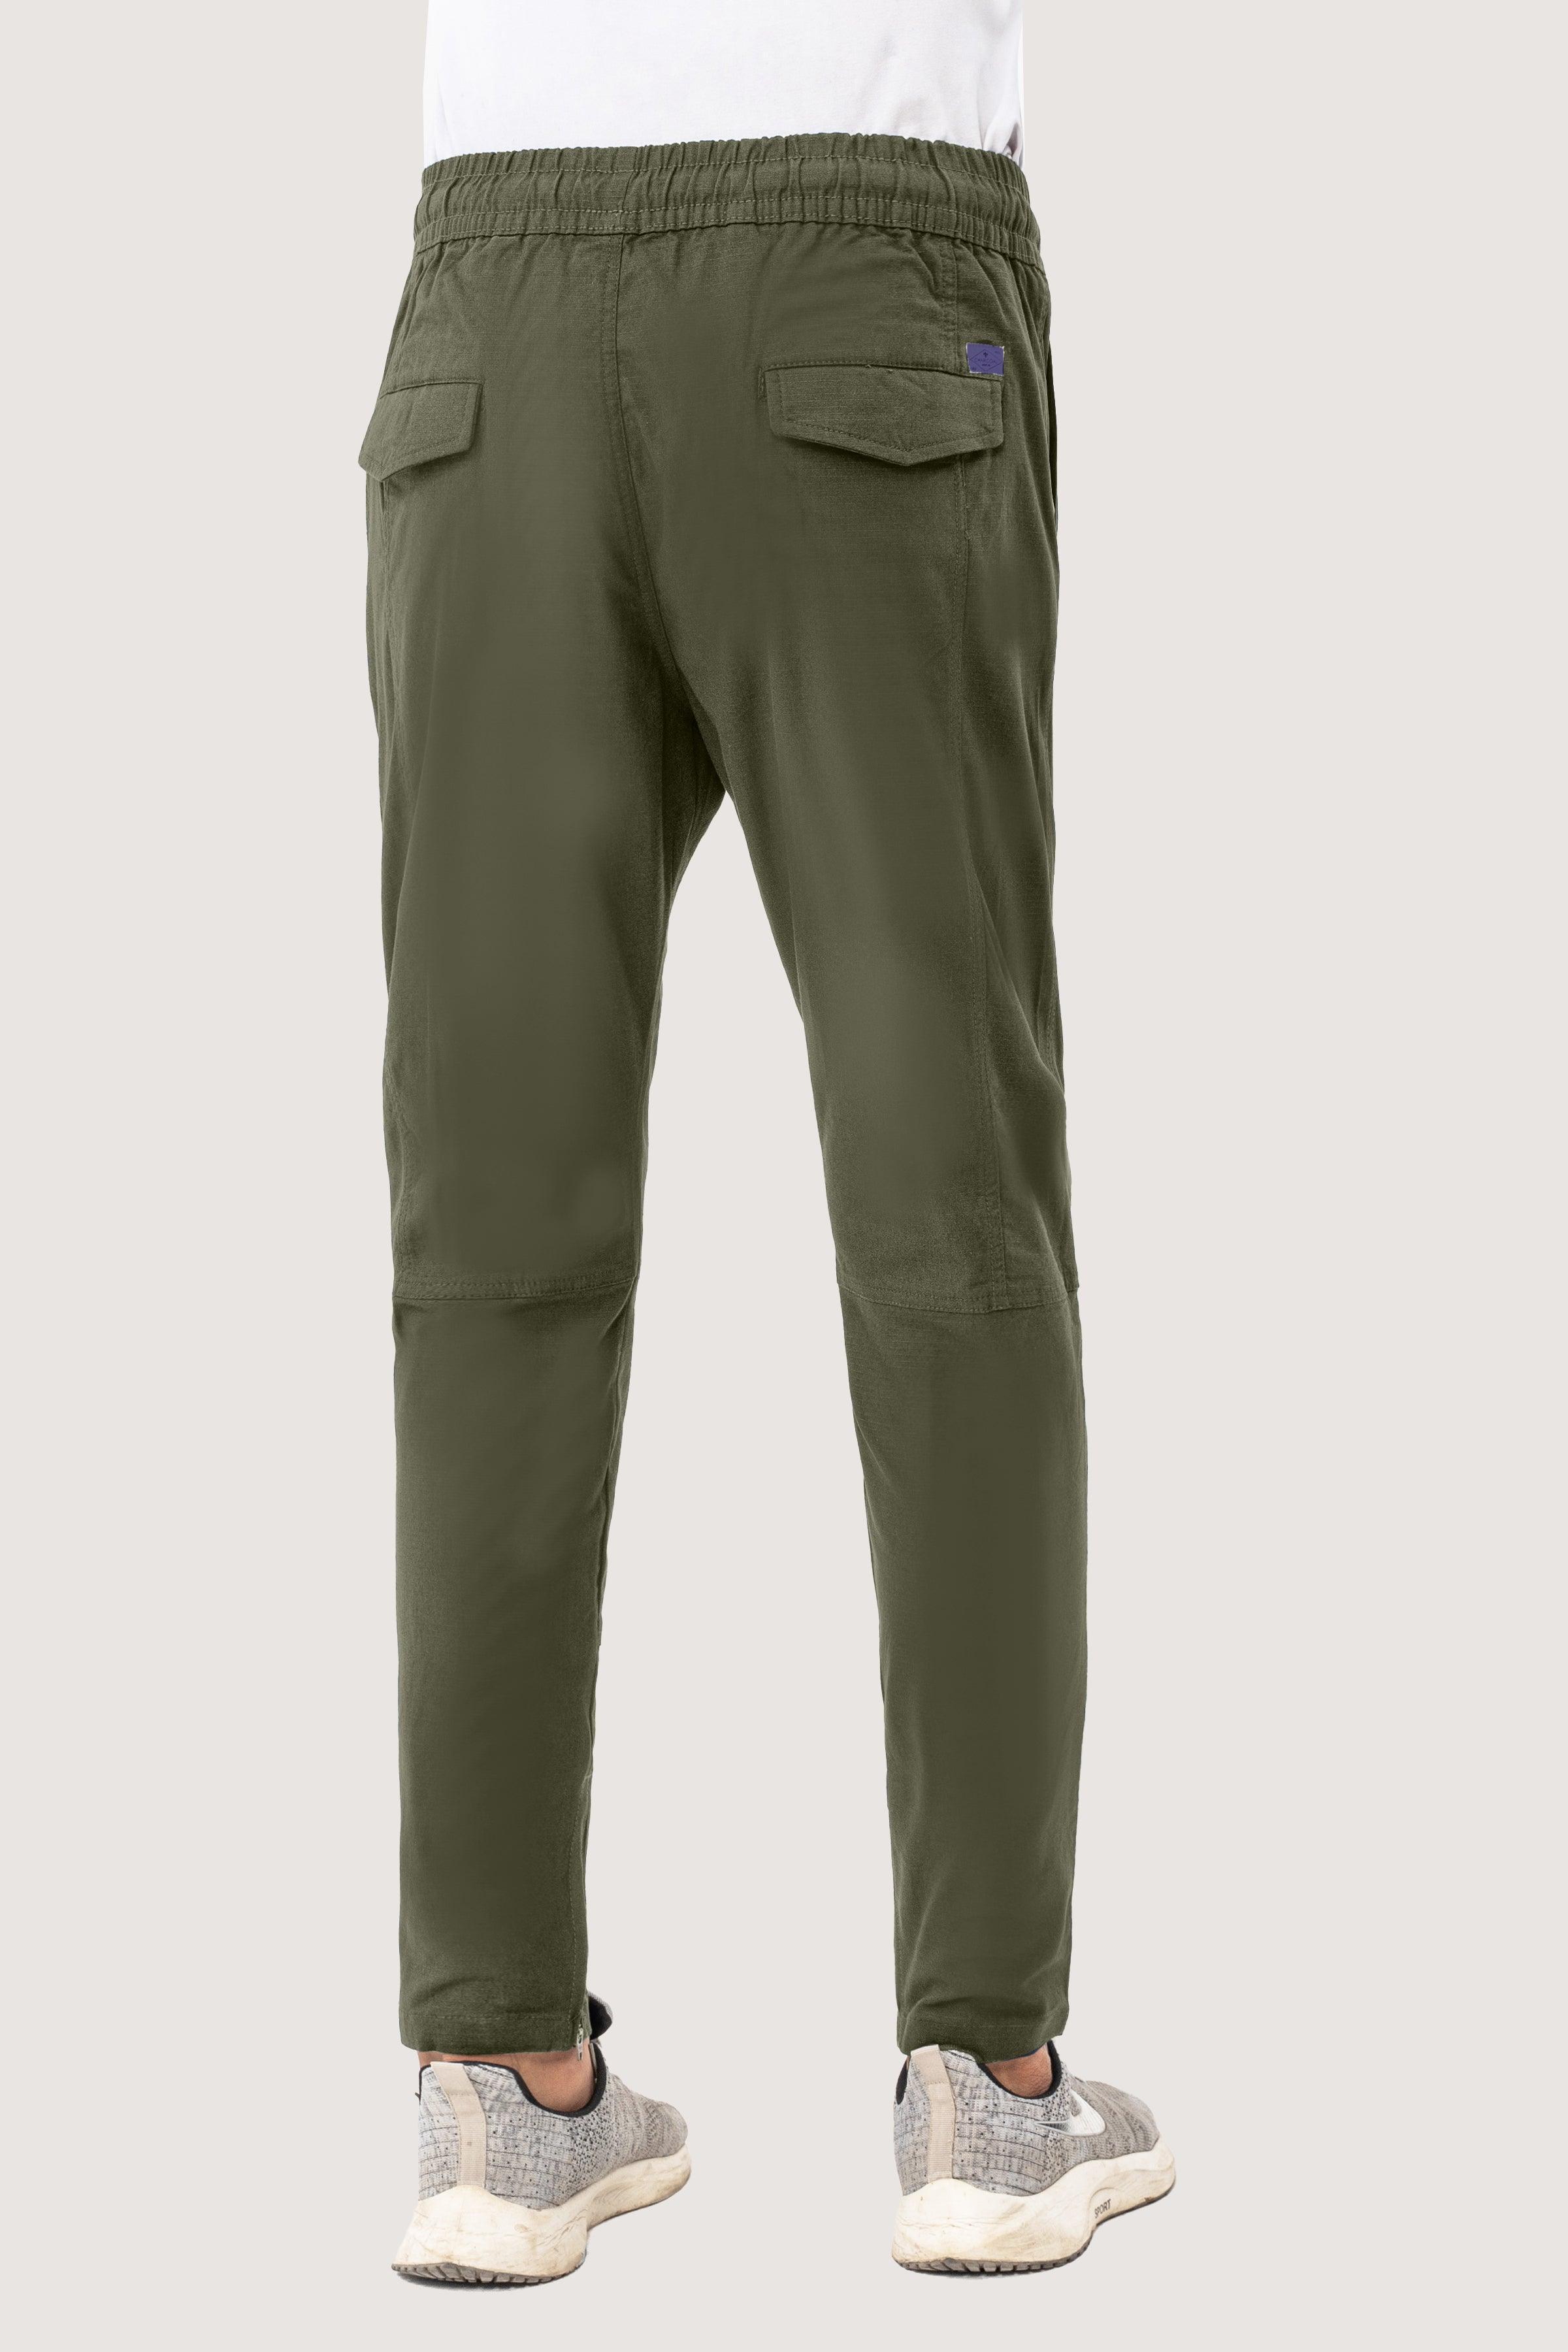 CASUAL RIPSTOP TROUSER DARK OLIVE at Charcoal Clothing